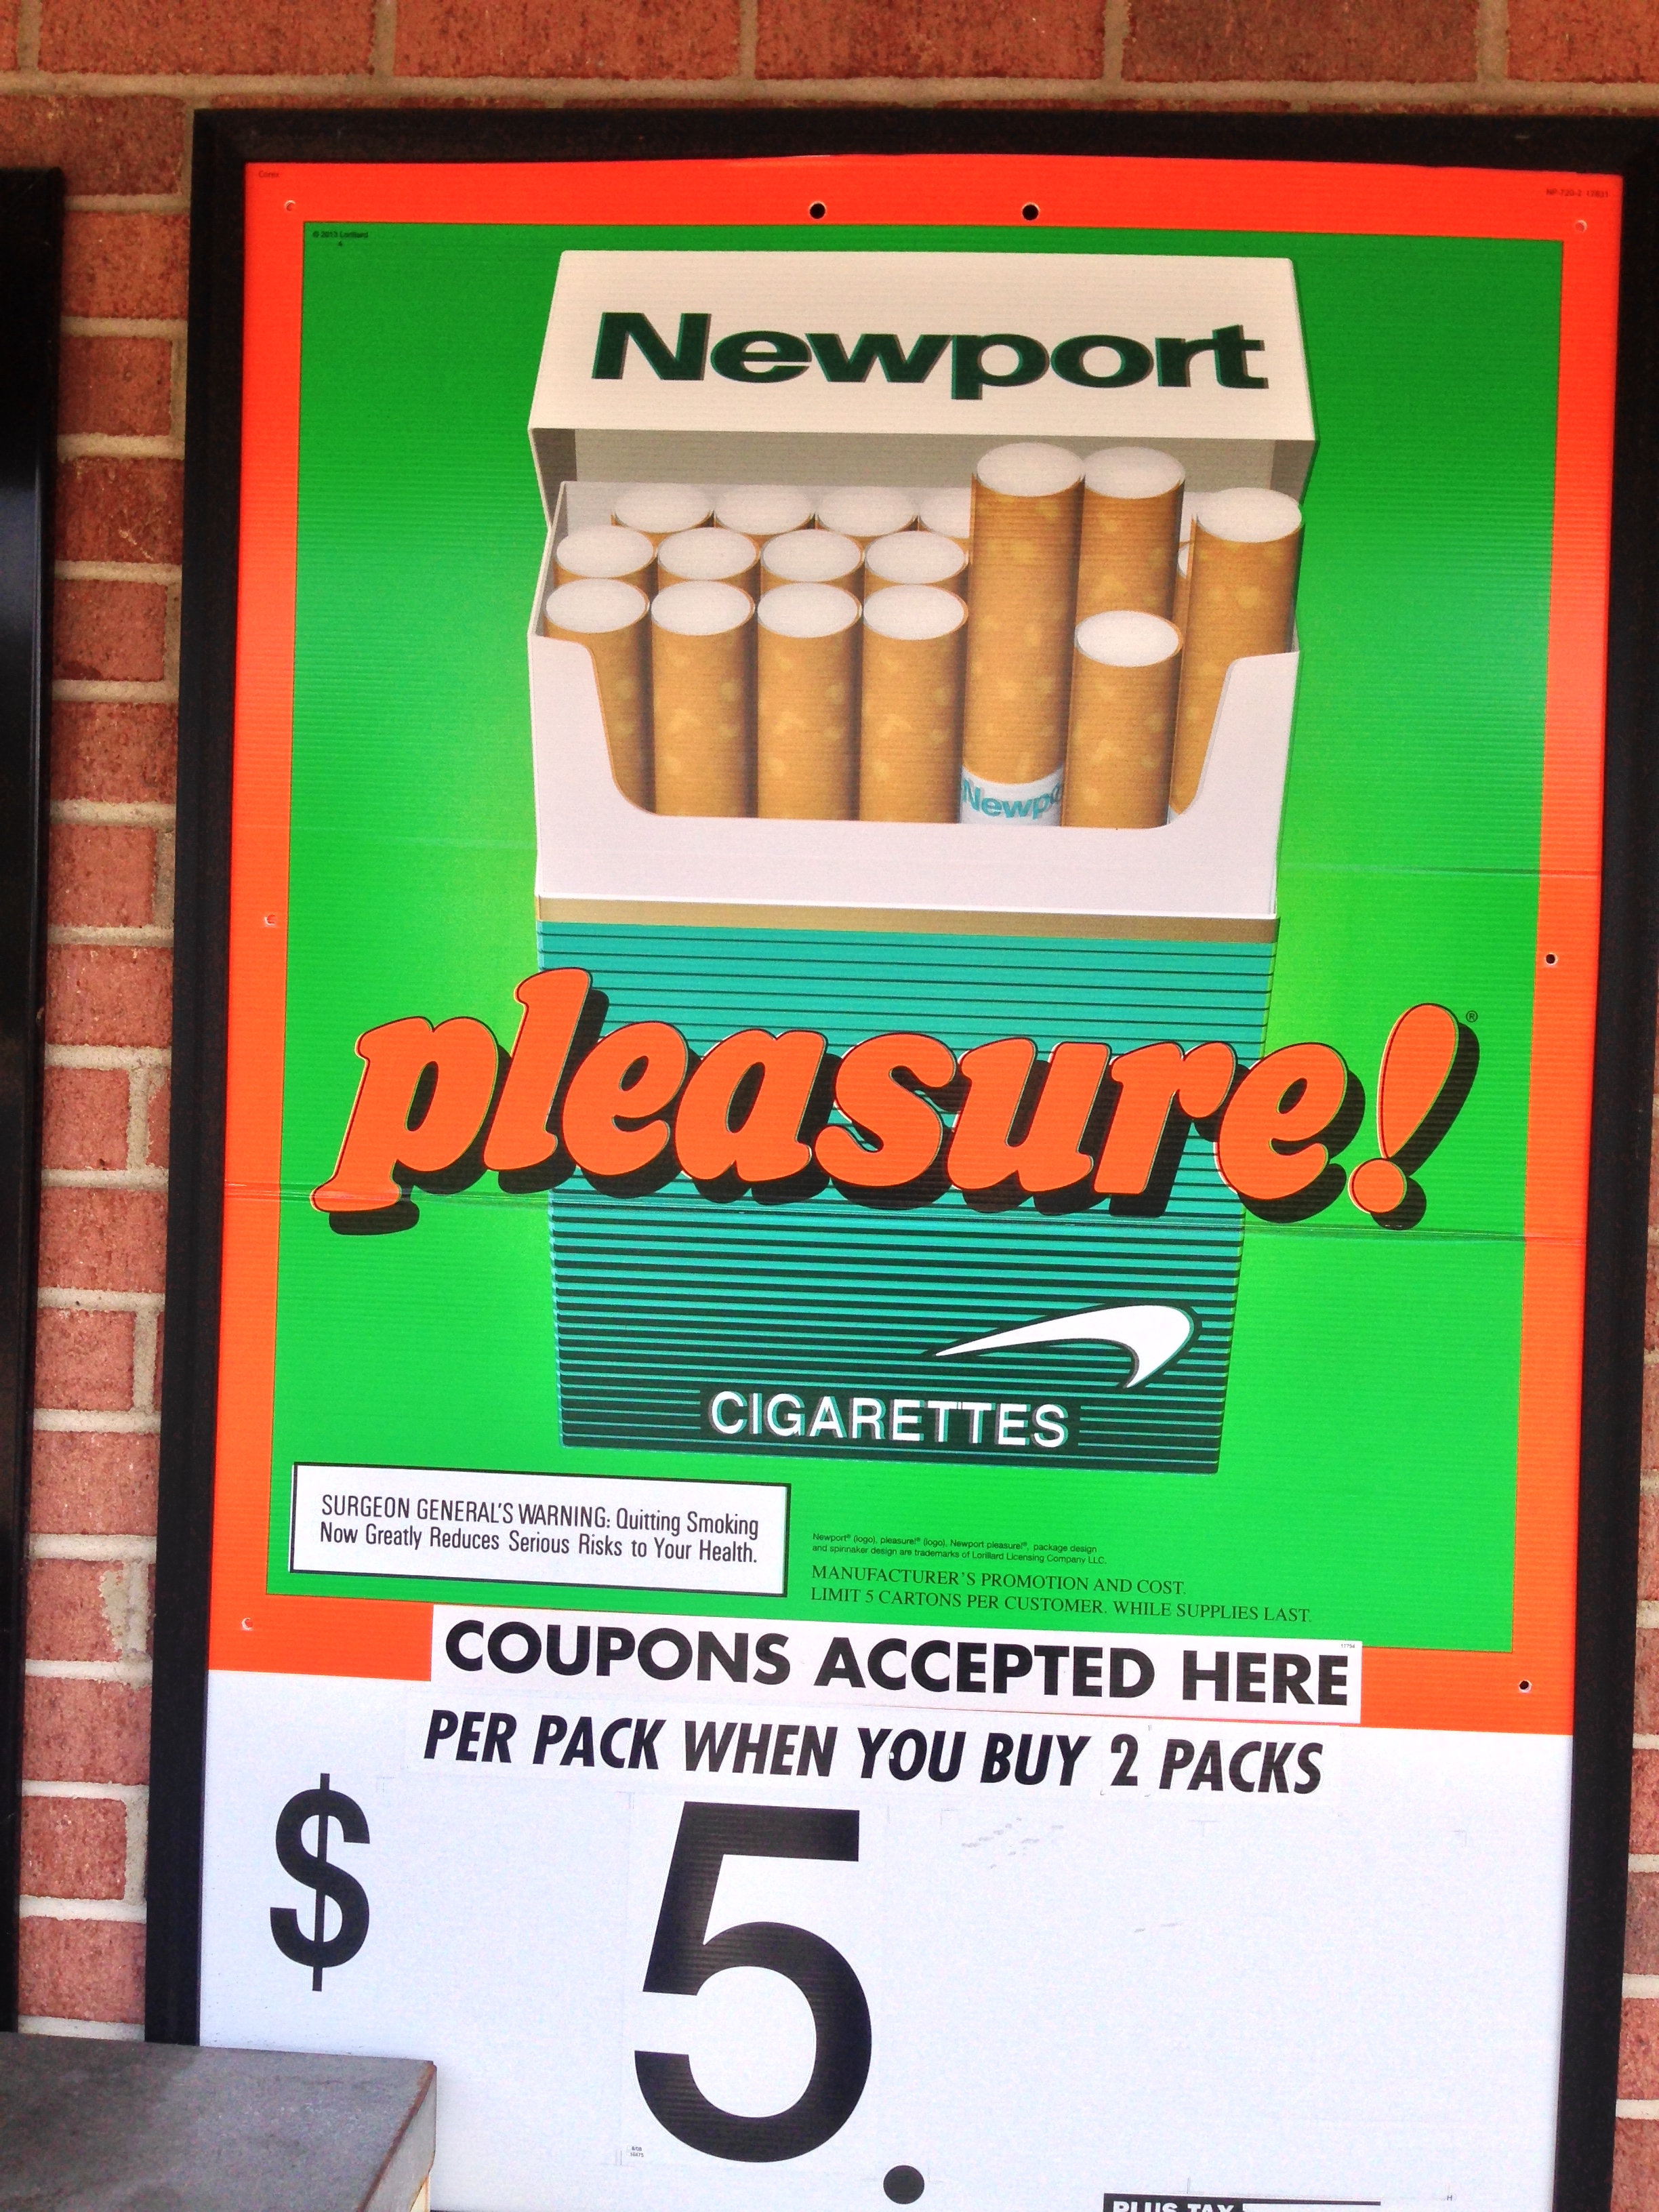 Newport menthol cigarette ad on the exterior of a retailers with "coupons accepted here. $5 per pack when you buy 2 packs"